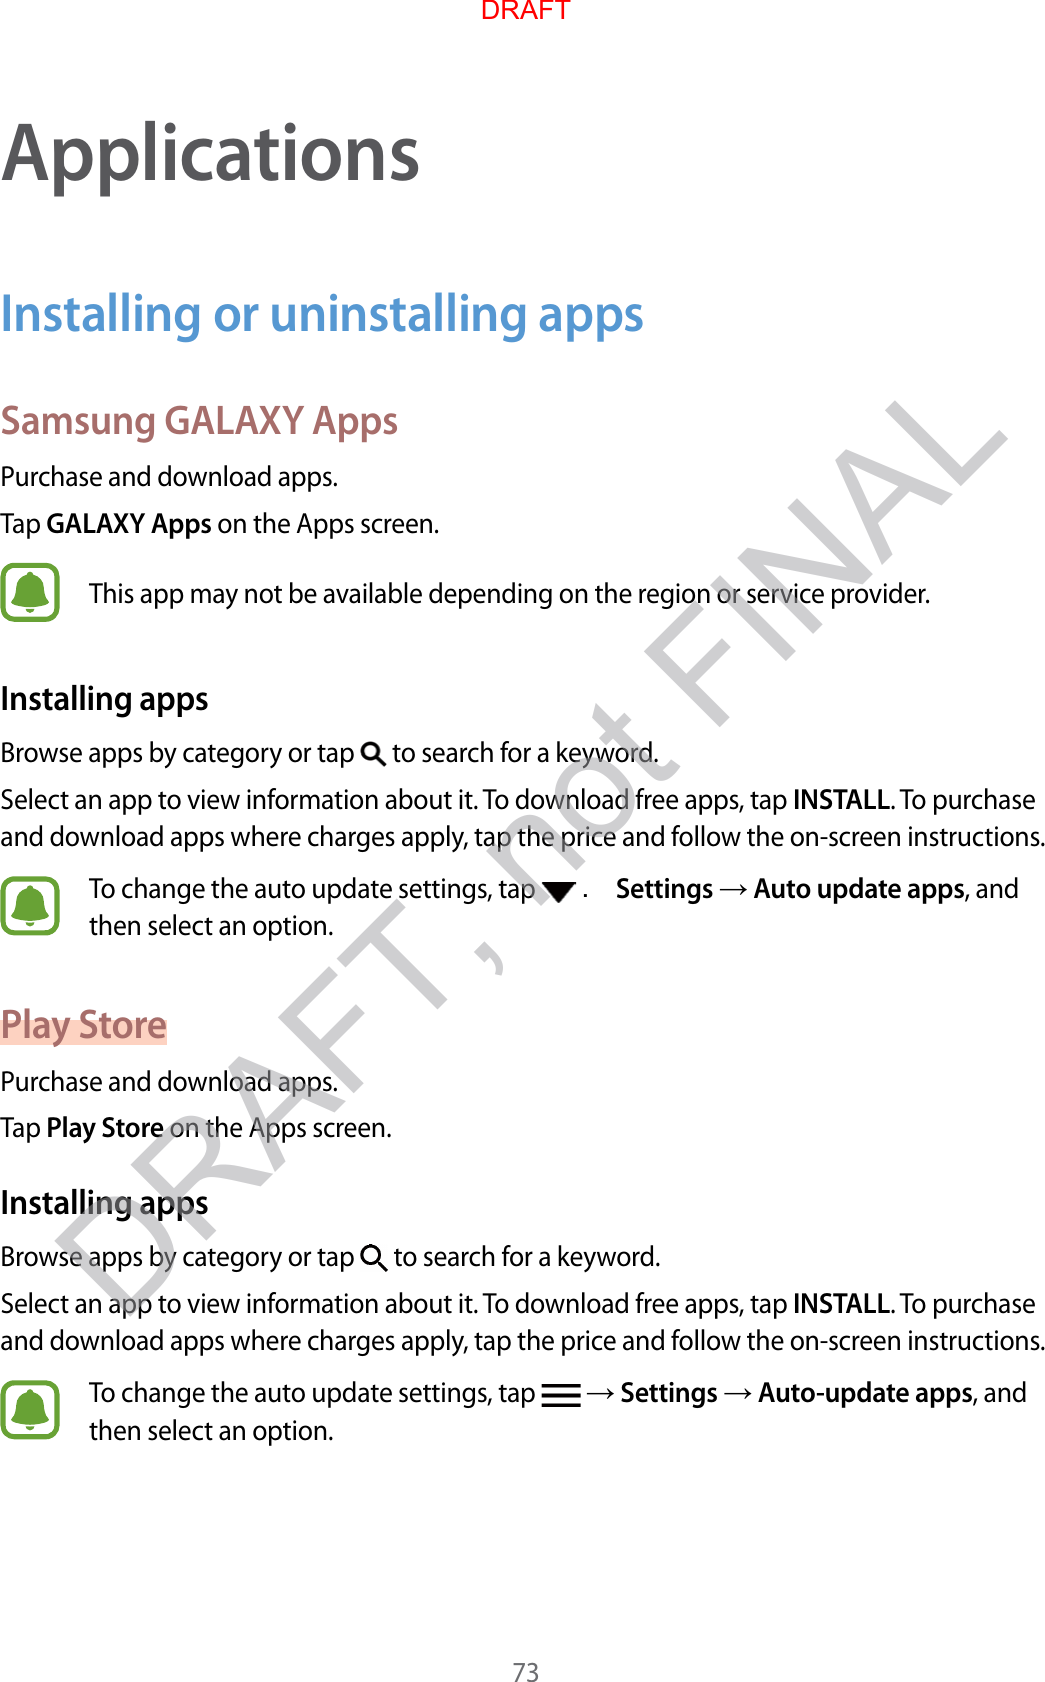 73ApplicationsInstalling or uninstalling appsSamsung GALAXY AppsPurchase and download apps.Tap GALAXY Apps on the Apps screen.This app may not be available depending on the region or service provider.Installing appsBrowse apps by category or tap   to search for a keyword.Select an app to view information about it. To download free apps, tap INSTALL. To purchase and download apps where charges apply, tap the price and follow the on-screen instructions.To change the auto update settings, tap   . Settings  Auto update apps, and then select an option.Play StorePurchase and download apps.Tap Play Store on the Apps screen.Installing appsBrowse apps by category or tap   to search for a keyword.Select an app to view information about it. To download free apps, tap INSTALL. To purchase and download apps where charges apply, tap the price and follow the on-screen instructions.To change the auto update settings, tap    Settings  Auto-update apps, and then select an option.DRAFTDRAFT, not FINAL